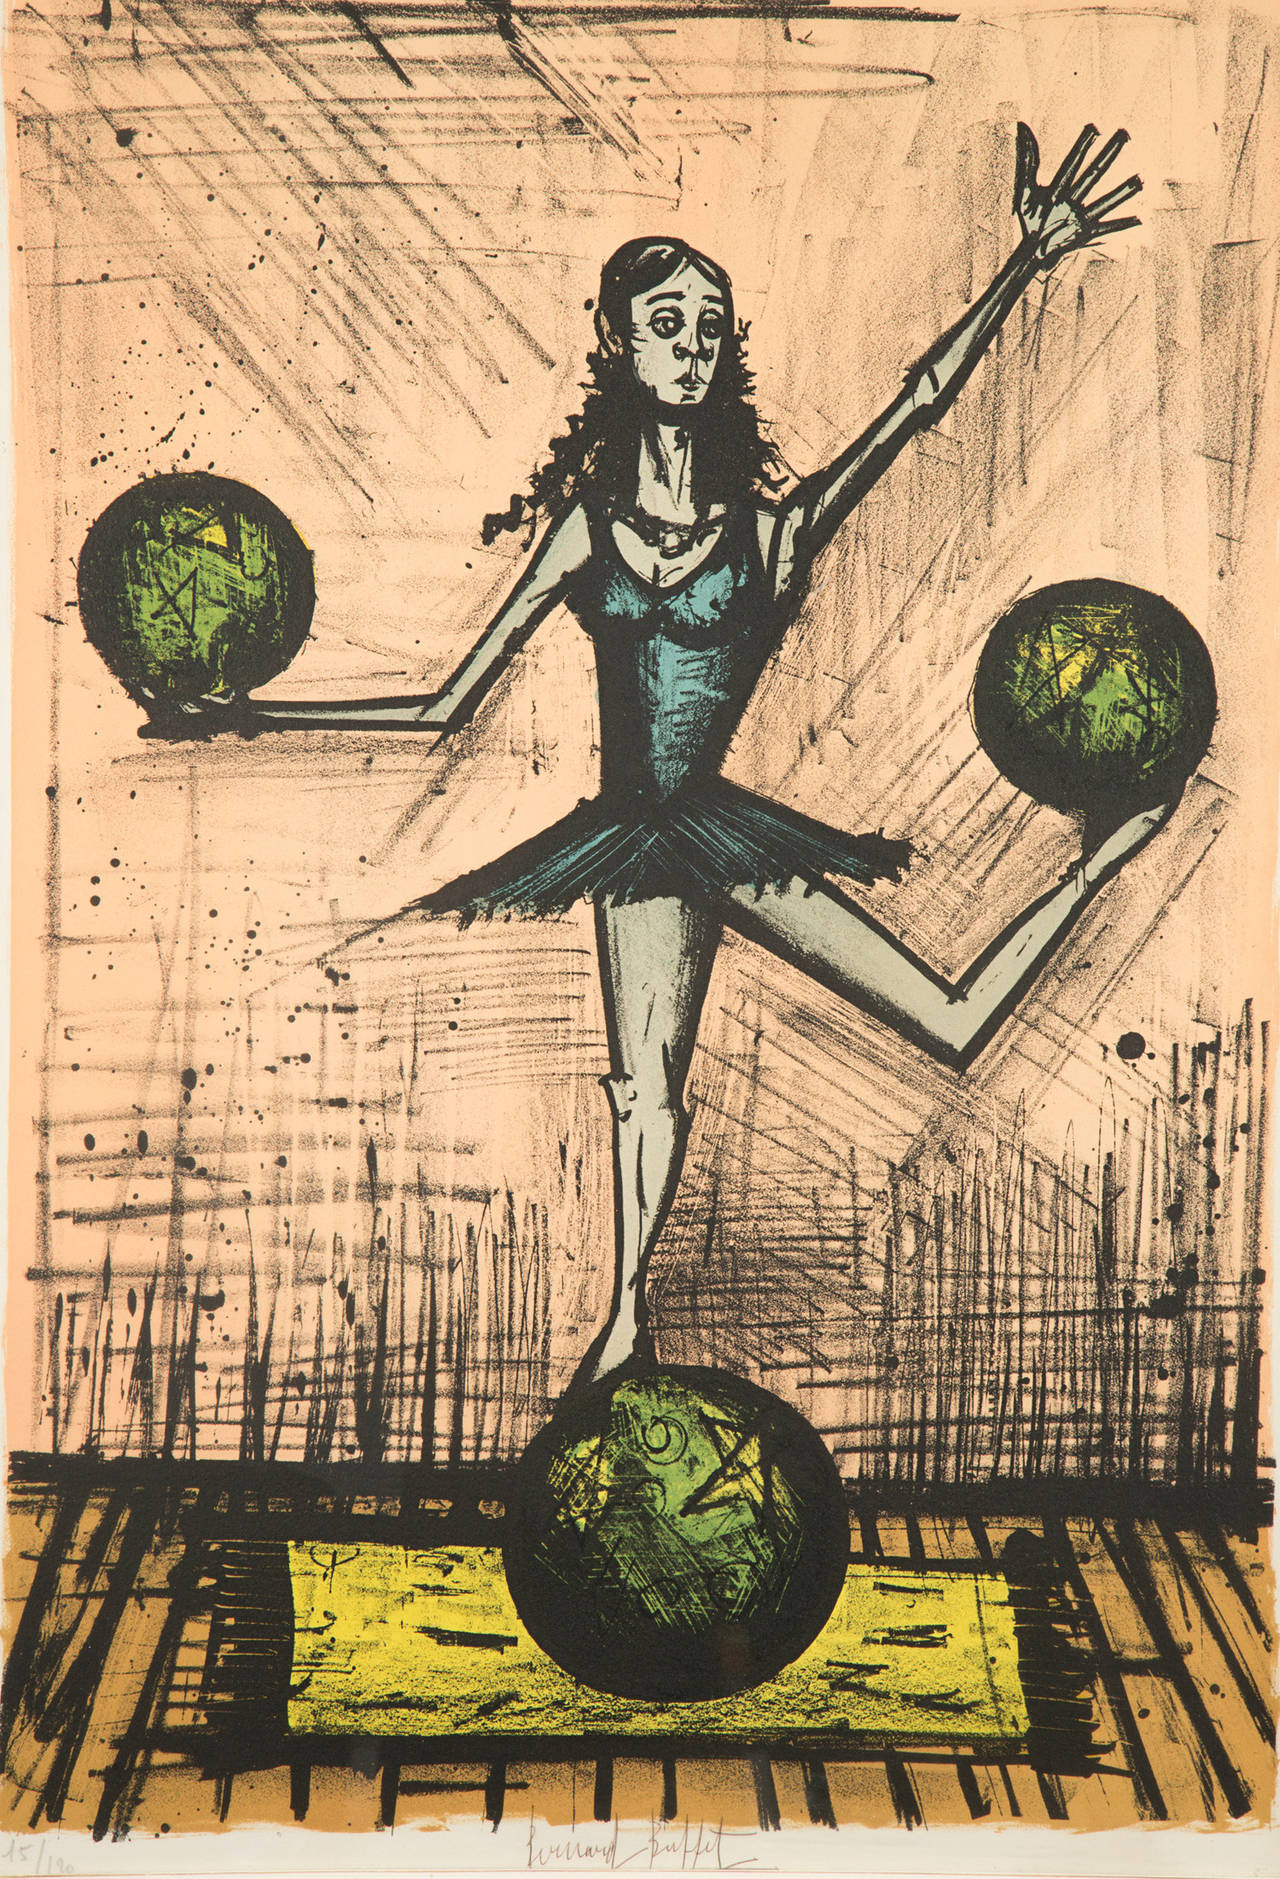 Bernard BUFFET (1928-1999)
Mademoiselle X, 1968, lithograph 

Original six colors lithograph on vellum. 

Signed with ink lower middle by Bernard Buffet and numbered 15/120 with pencil lower left. 
Printing of 120. Editor F. Mourlot,